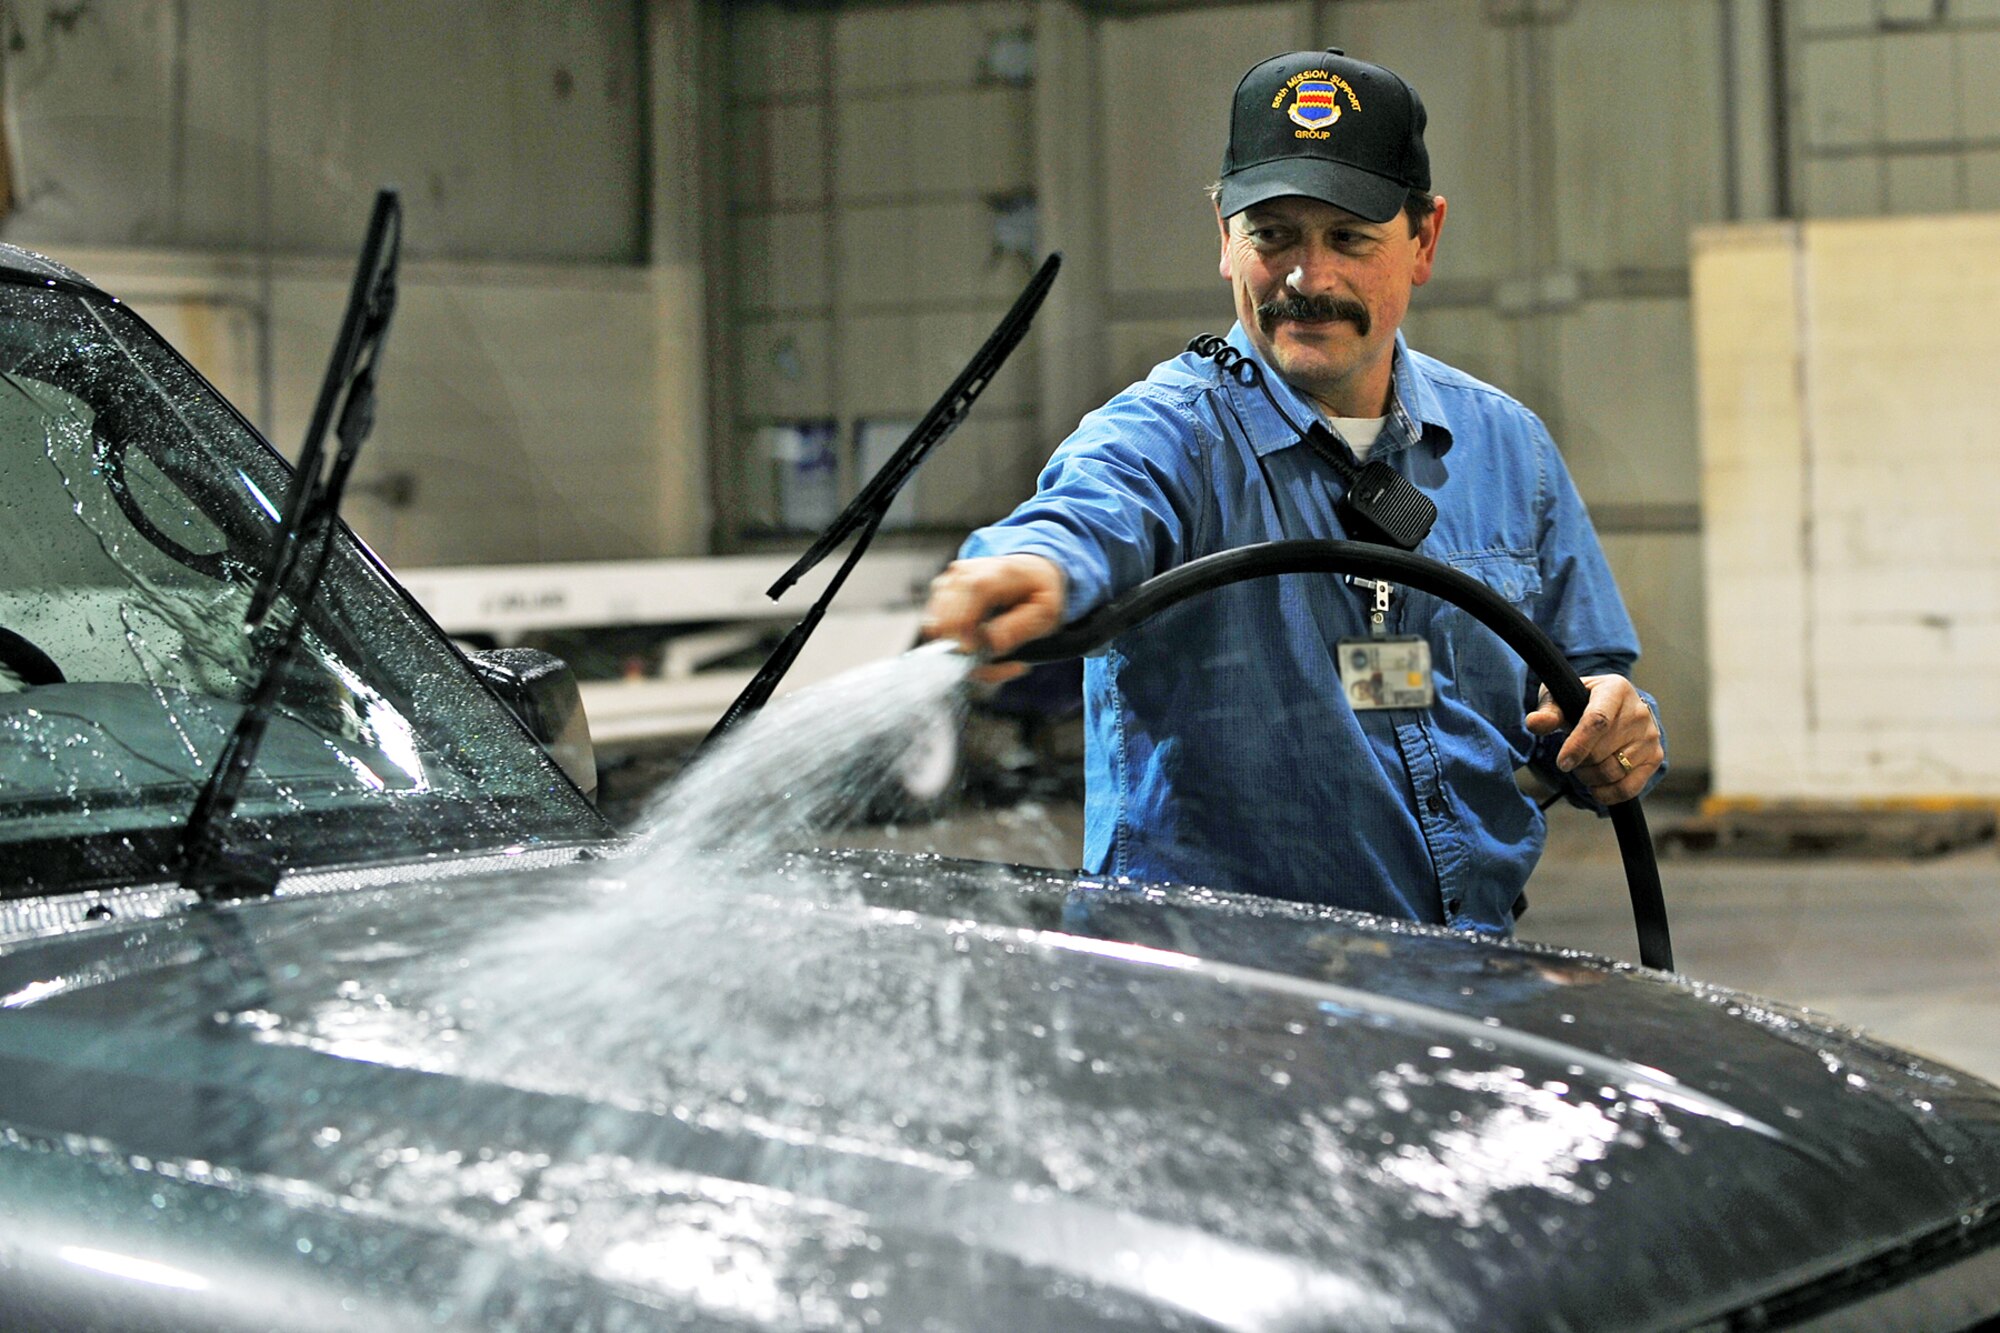 OFFUTT AIR FORCE BASE, Neb. - Mike Wangberg, work leader with the 55th Mission Support Group's Logistics Support Division, washes a vehicle inside Bldg. D March 19. The division's vehicle operations section takes care of Offutt's transportation needs using a fleet of more than 60 vehicles.  

U.S. Air Force photo by Charles Haymond